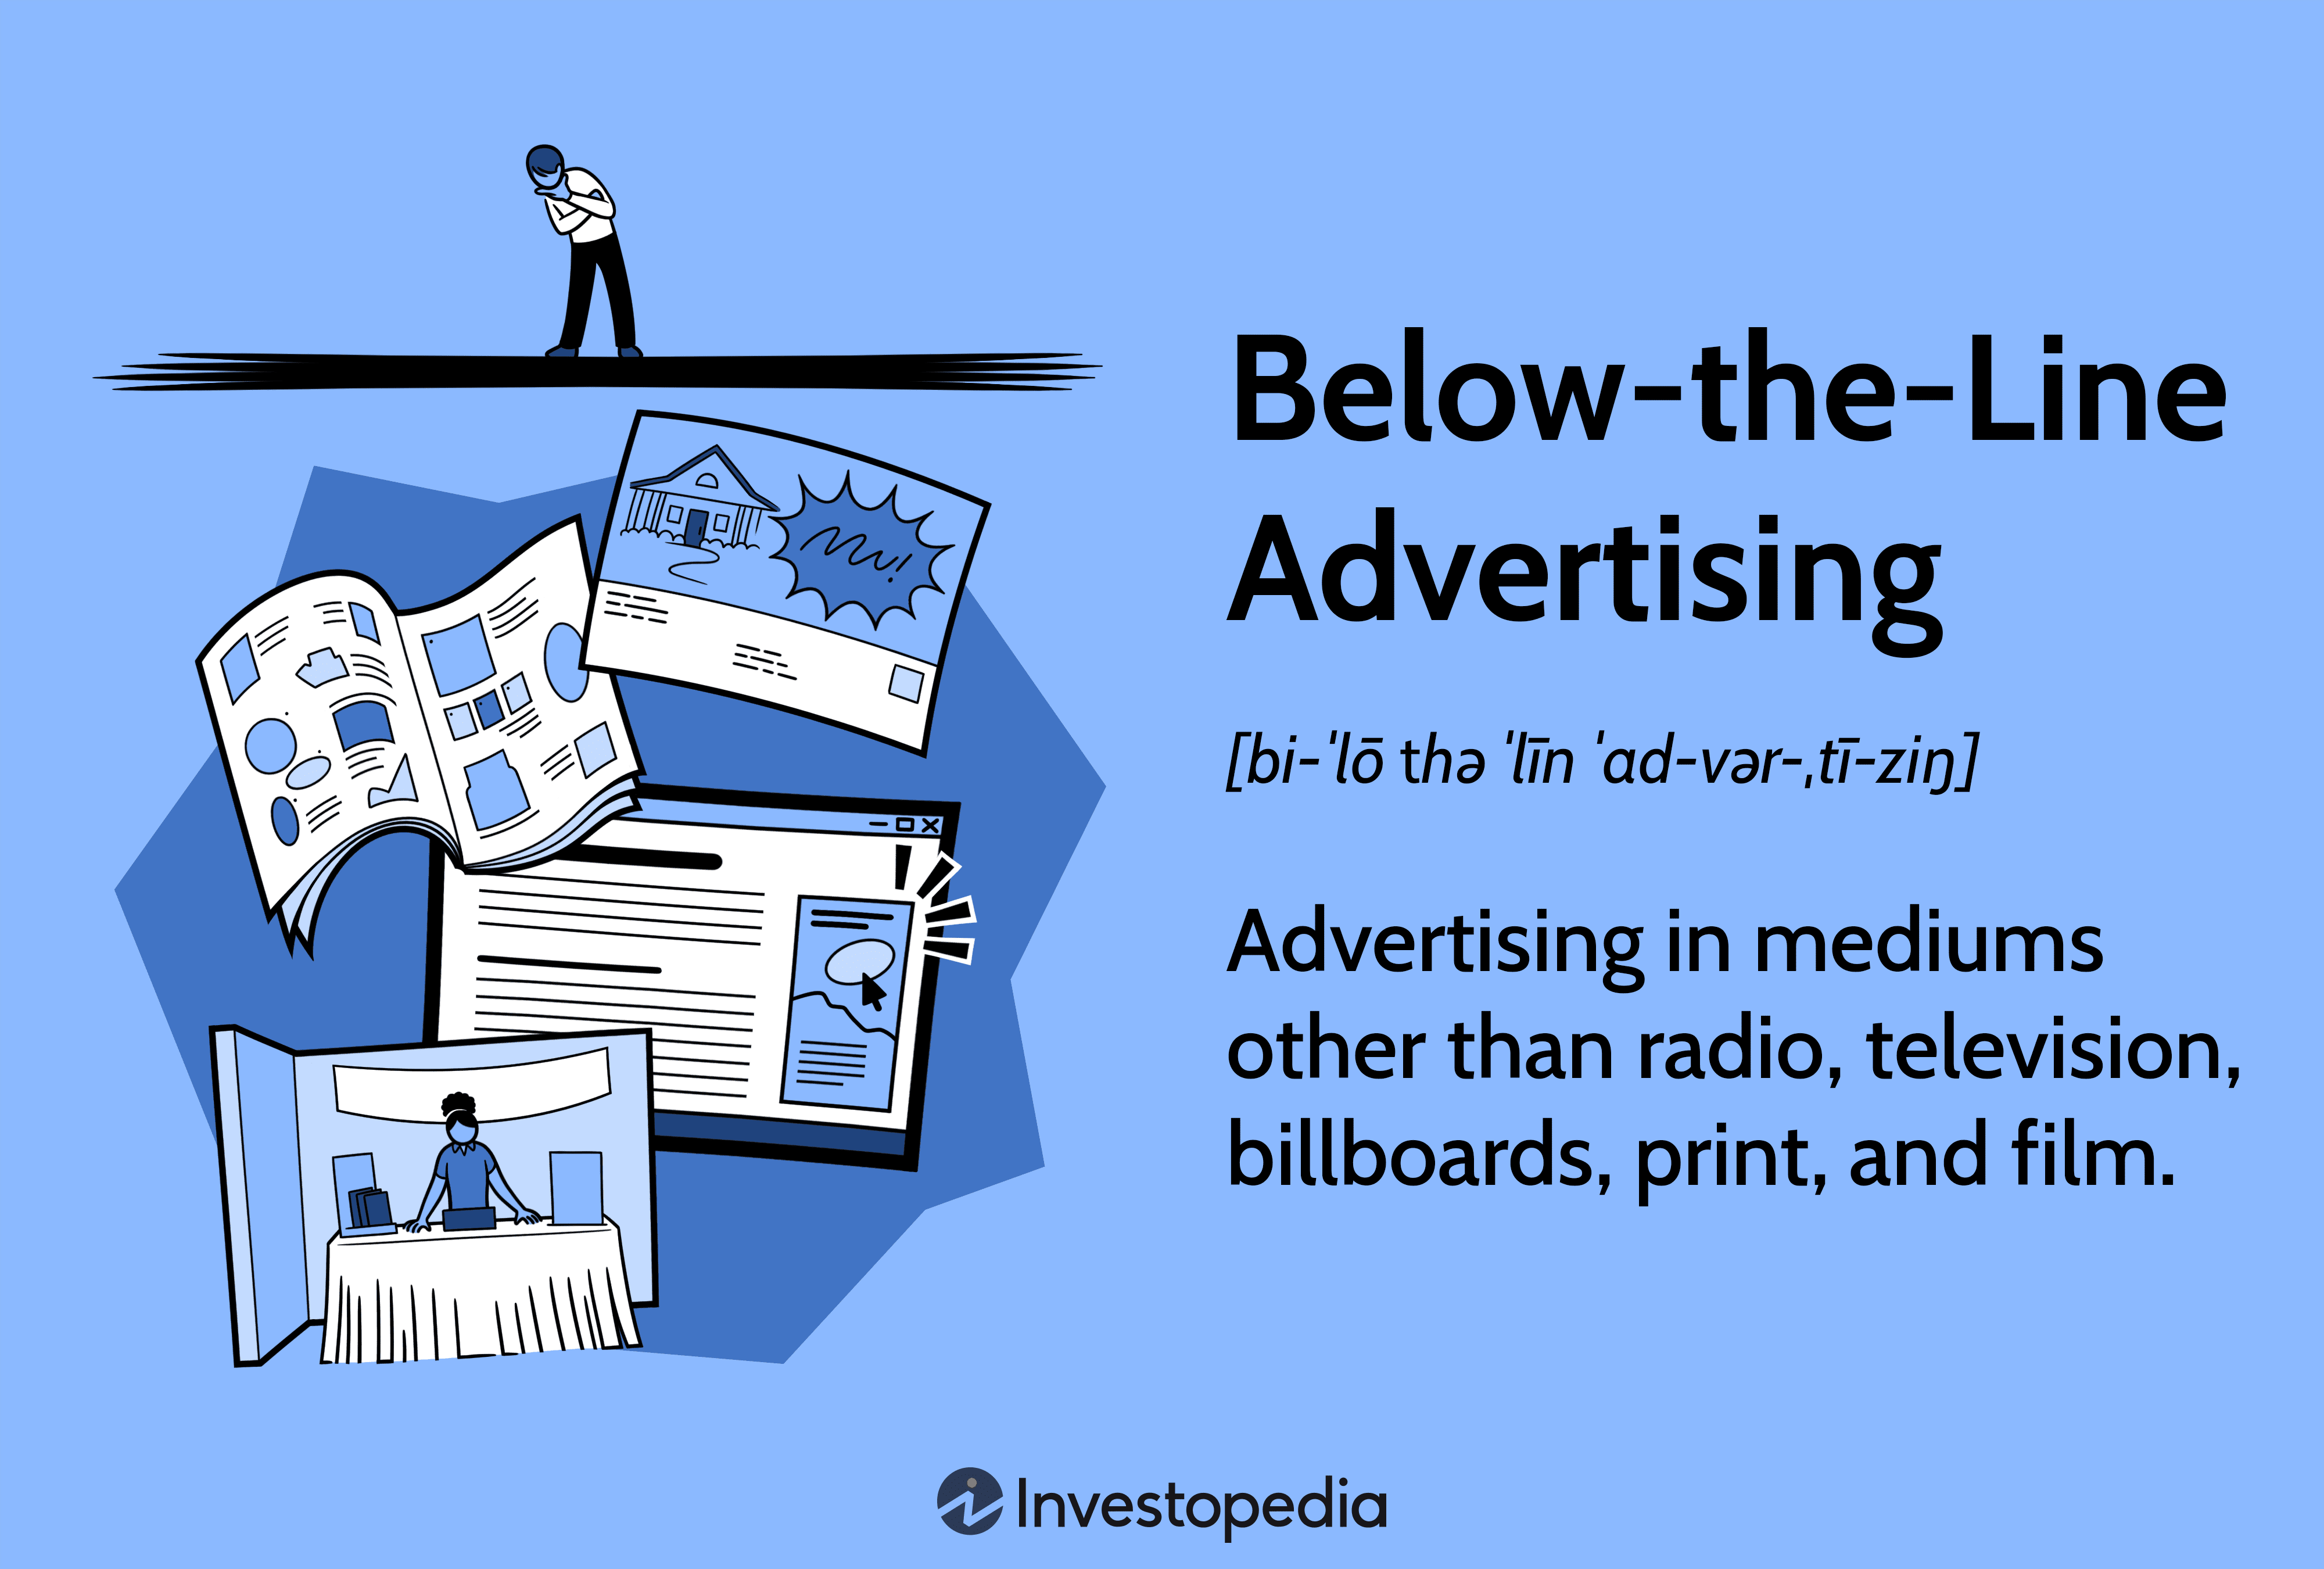 Below-the-Line Advertising: Advertising in mediums other than radio, television, billboards, print, and film.